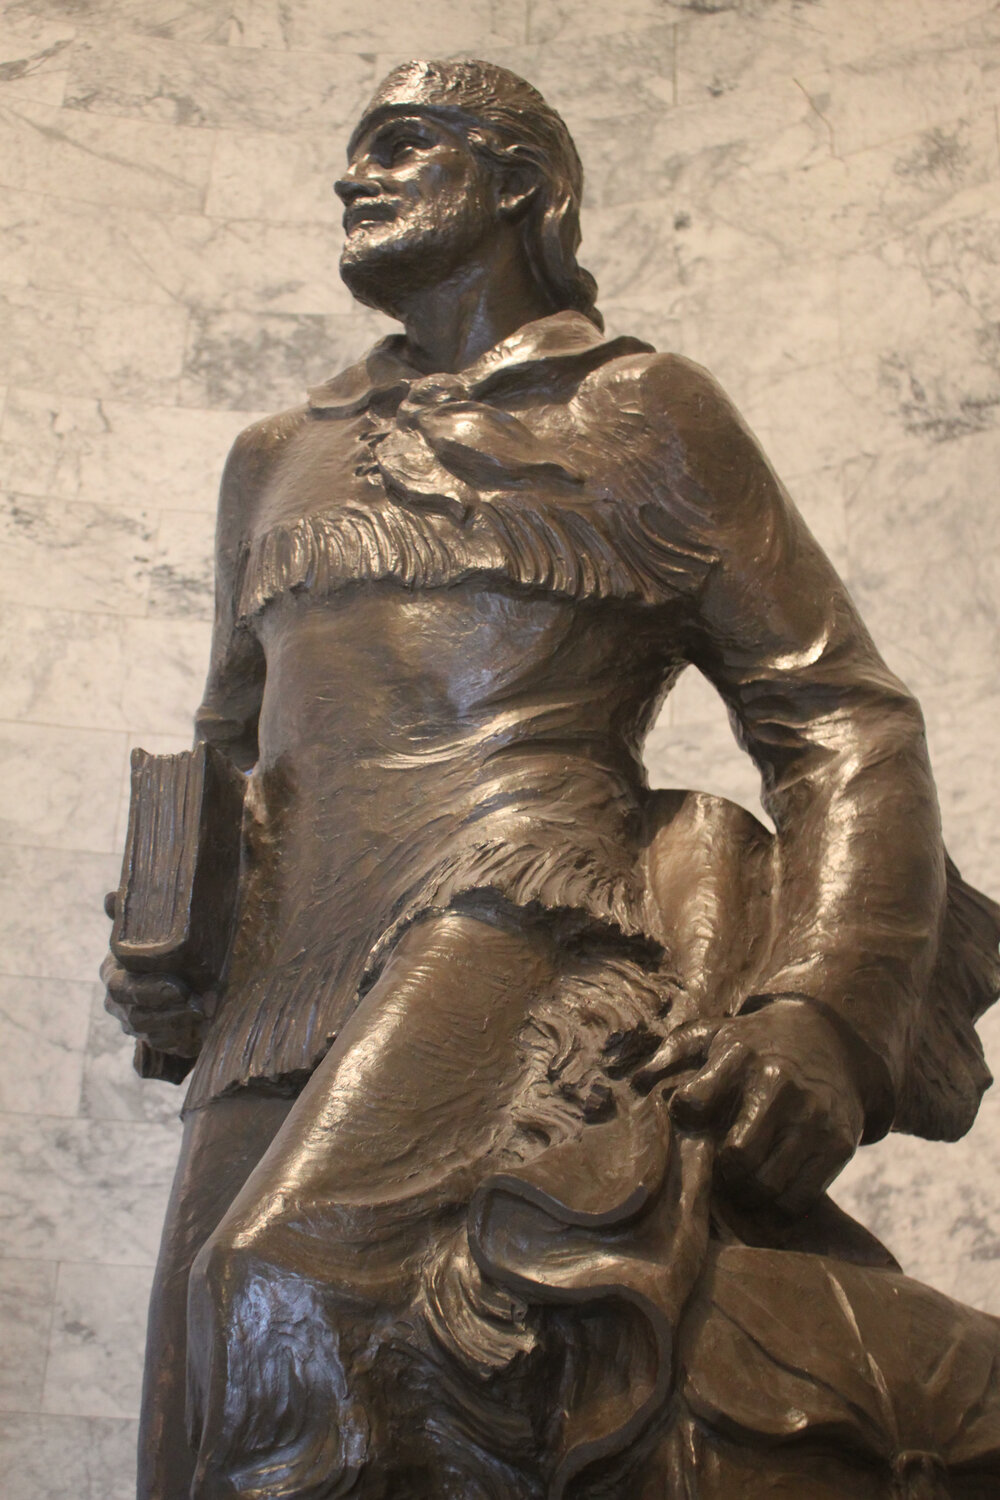 Statue of Marcus Whitman stands in the front lobby of Washington State’s capitol building. An exact replica exists in National Statuary Hall in Washington, D.C. Democrats have proposed to remove the statues and replace them with a different honoree. -- Photo by Emma Scher, WNPA Olympia News Bureau